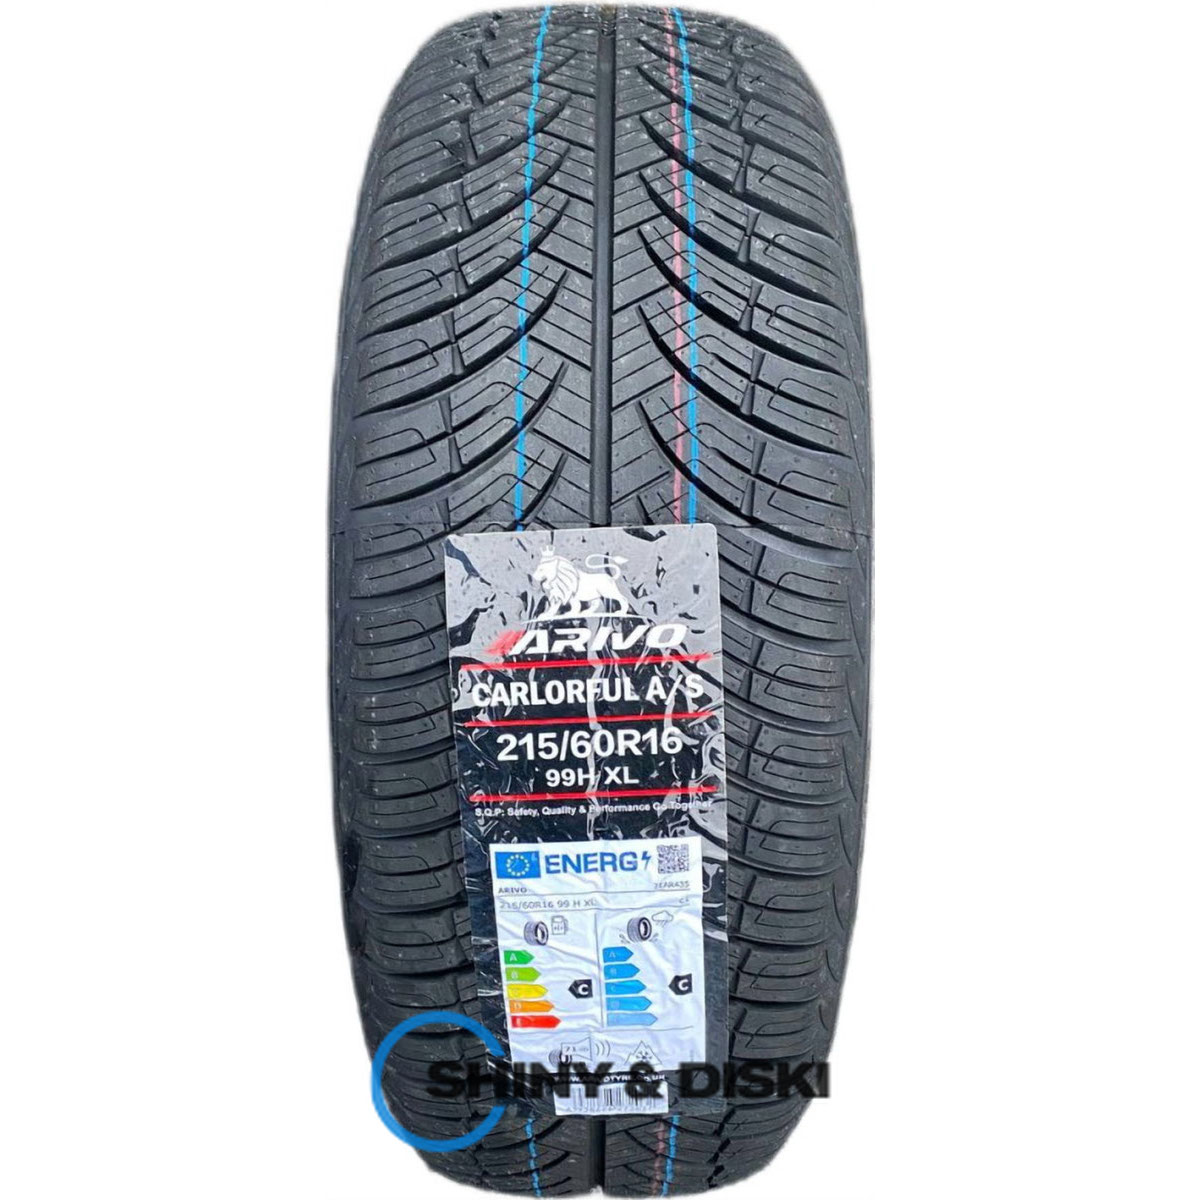 покрышки arivo carlorful a/s 175/70 r13 82t